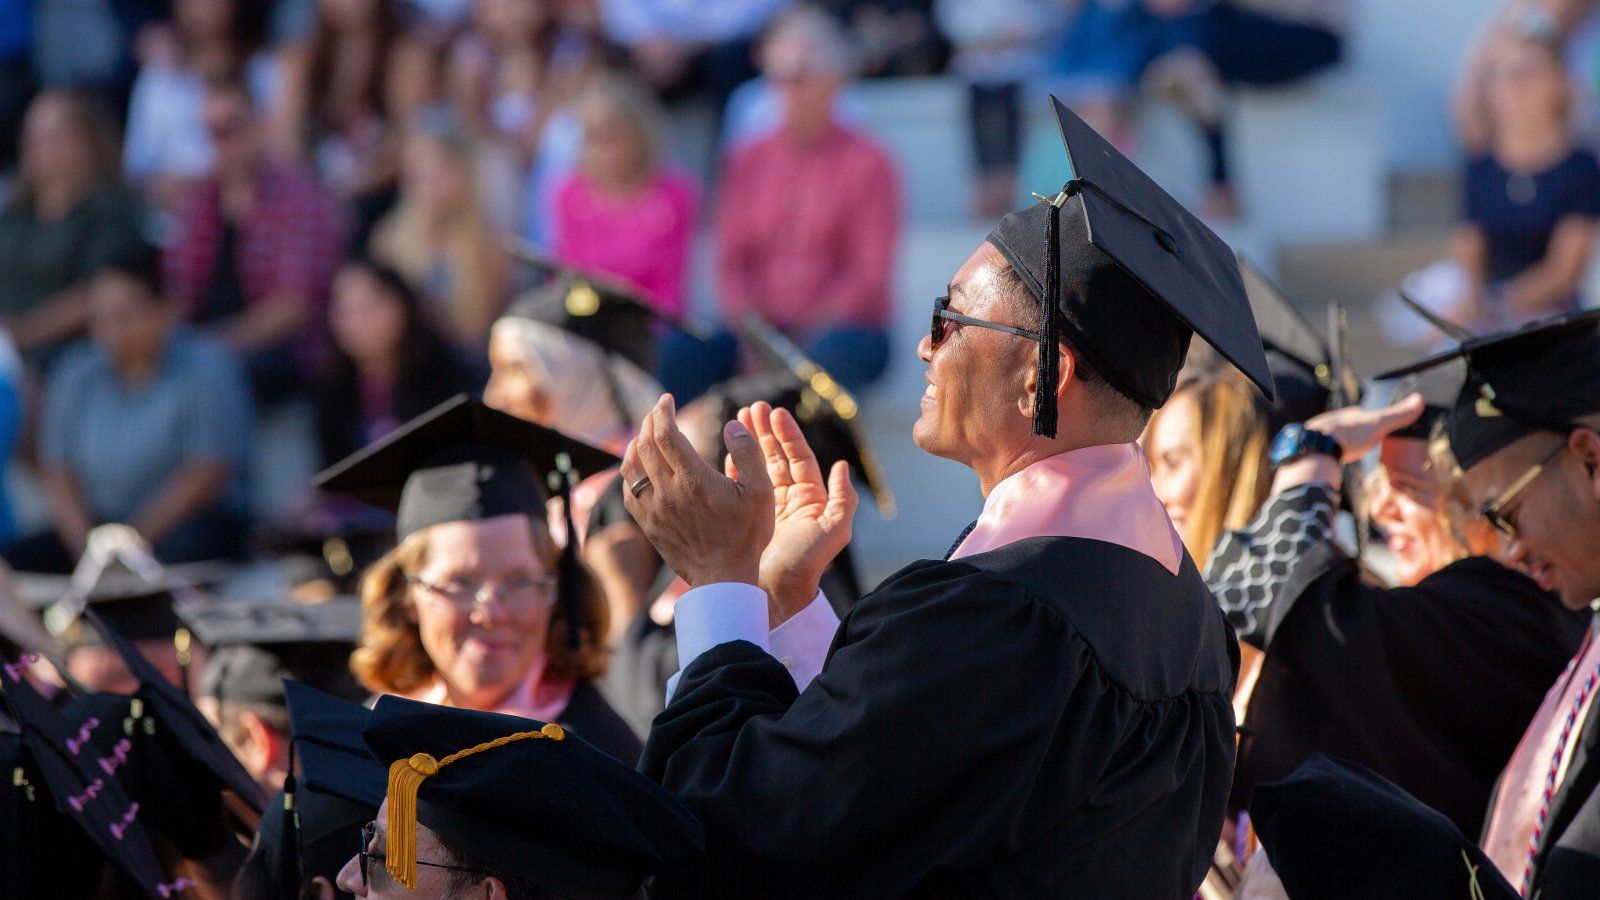 Male graduate student applauding during commencement